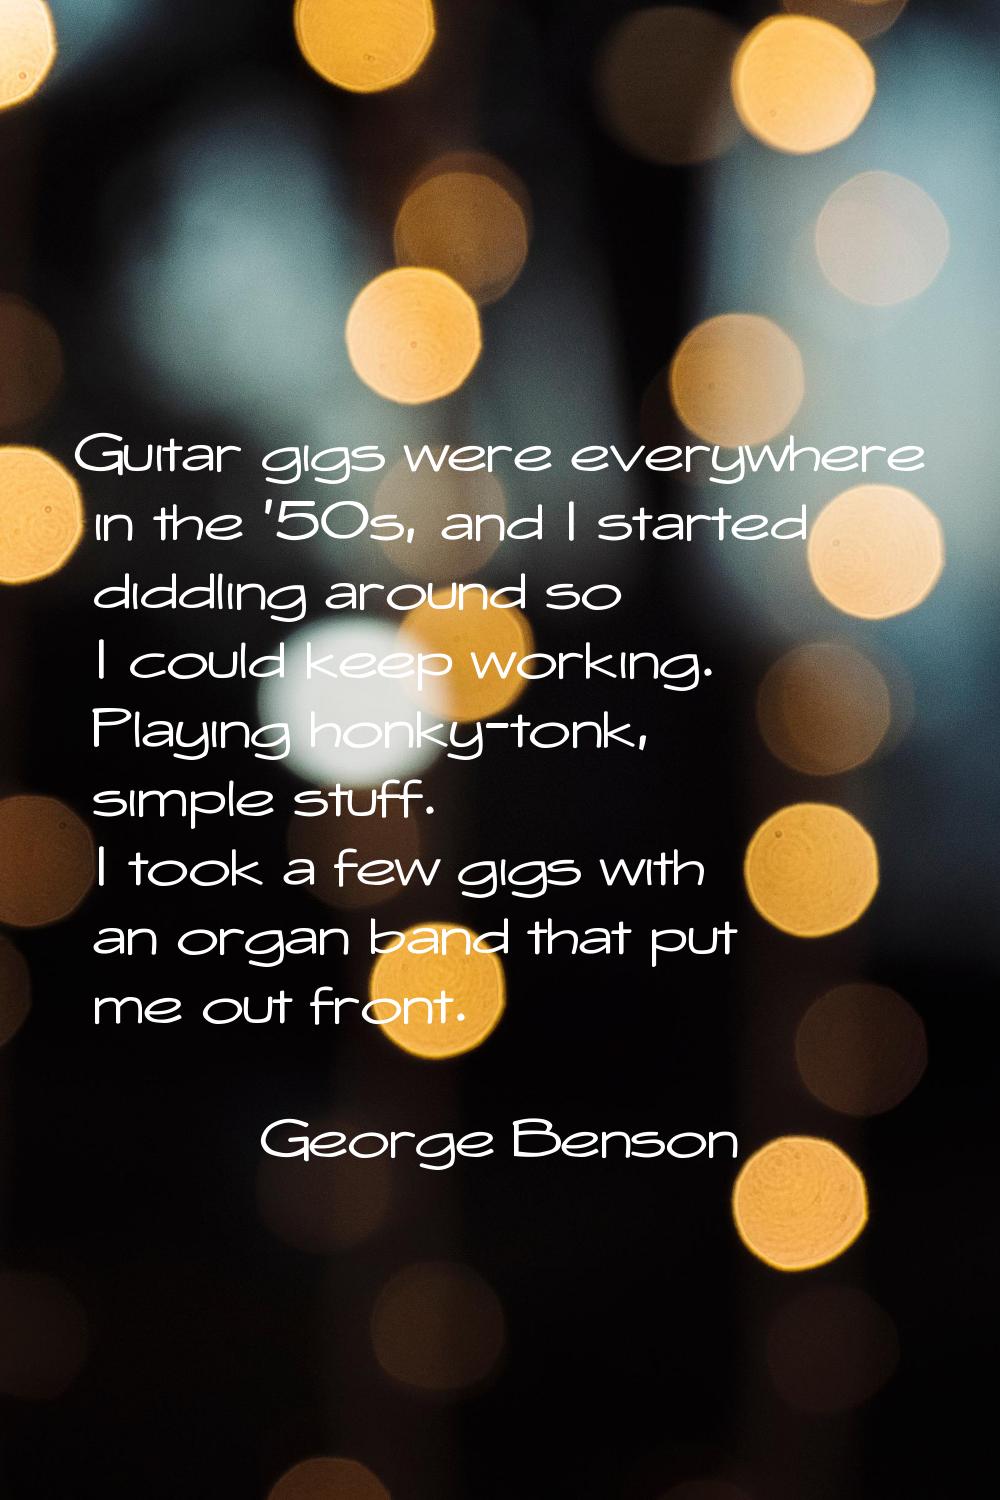 Guitar gigs were everywhere in the '50s, and I started diddling around so I could keep working. Pla